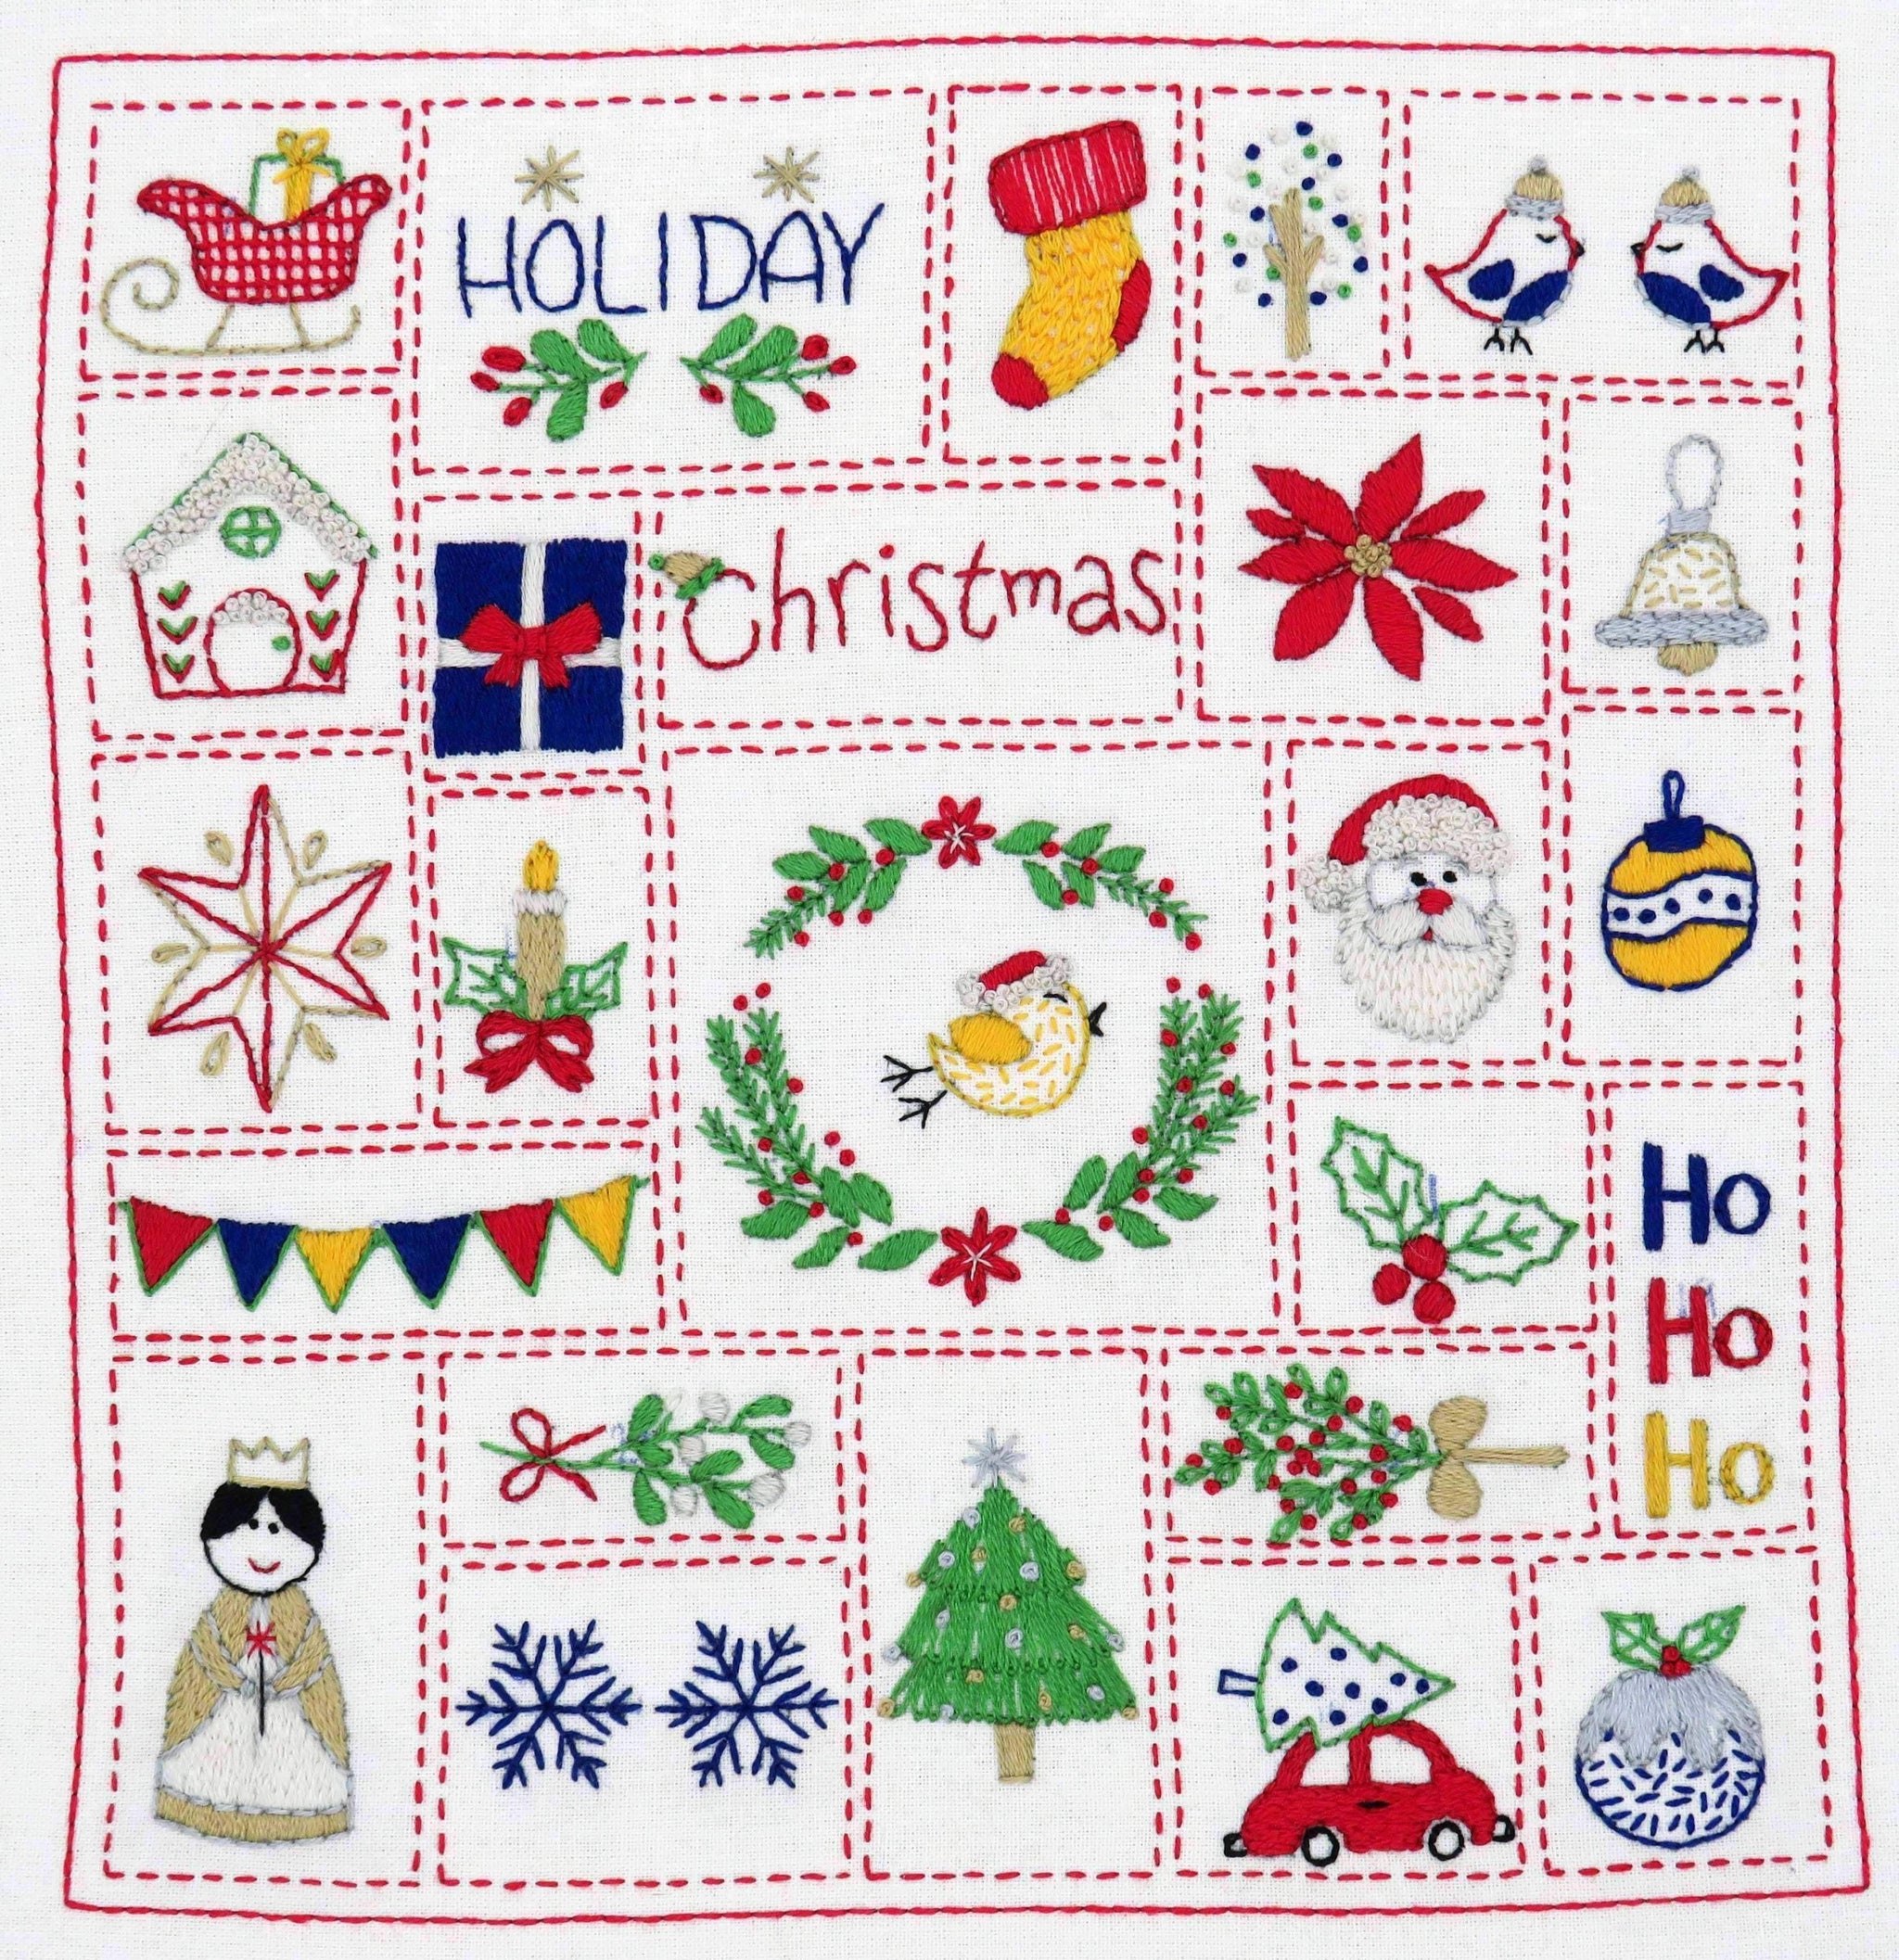 Christmas Advent Calendar Hand Embroidery Pattern , PDF Download , StitchDoodles , christmas, embroidery hoop kit, Embroidery Kit, embroidery kit for adults, embroidery kit fro beginners, embroidery kits for adults, embroidery kits for beginners, modern embroidery kits, pdf , StitchDoodles , shop.stitchdoodles.com